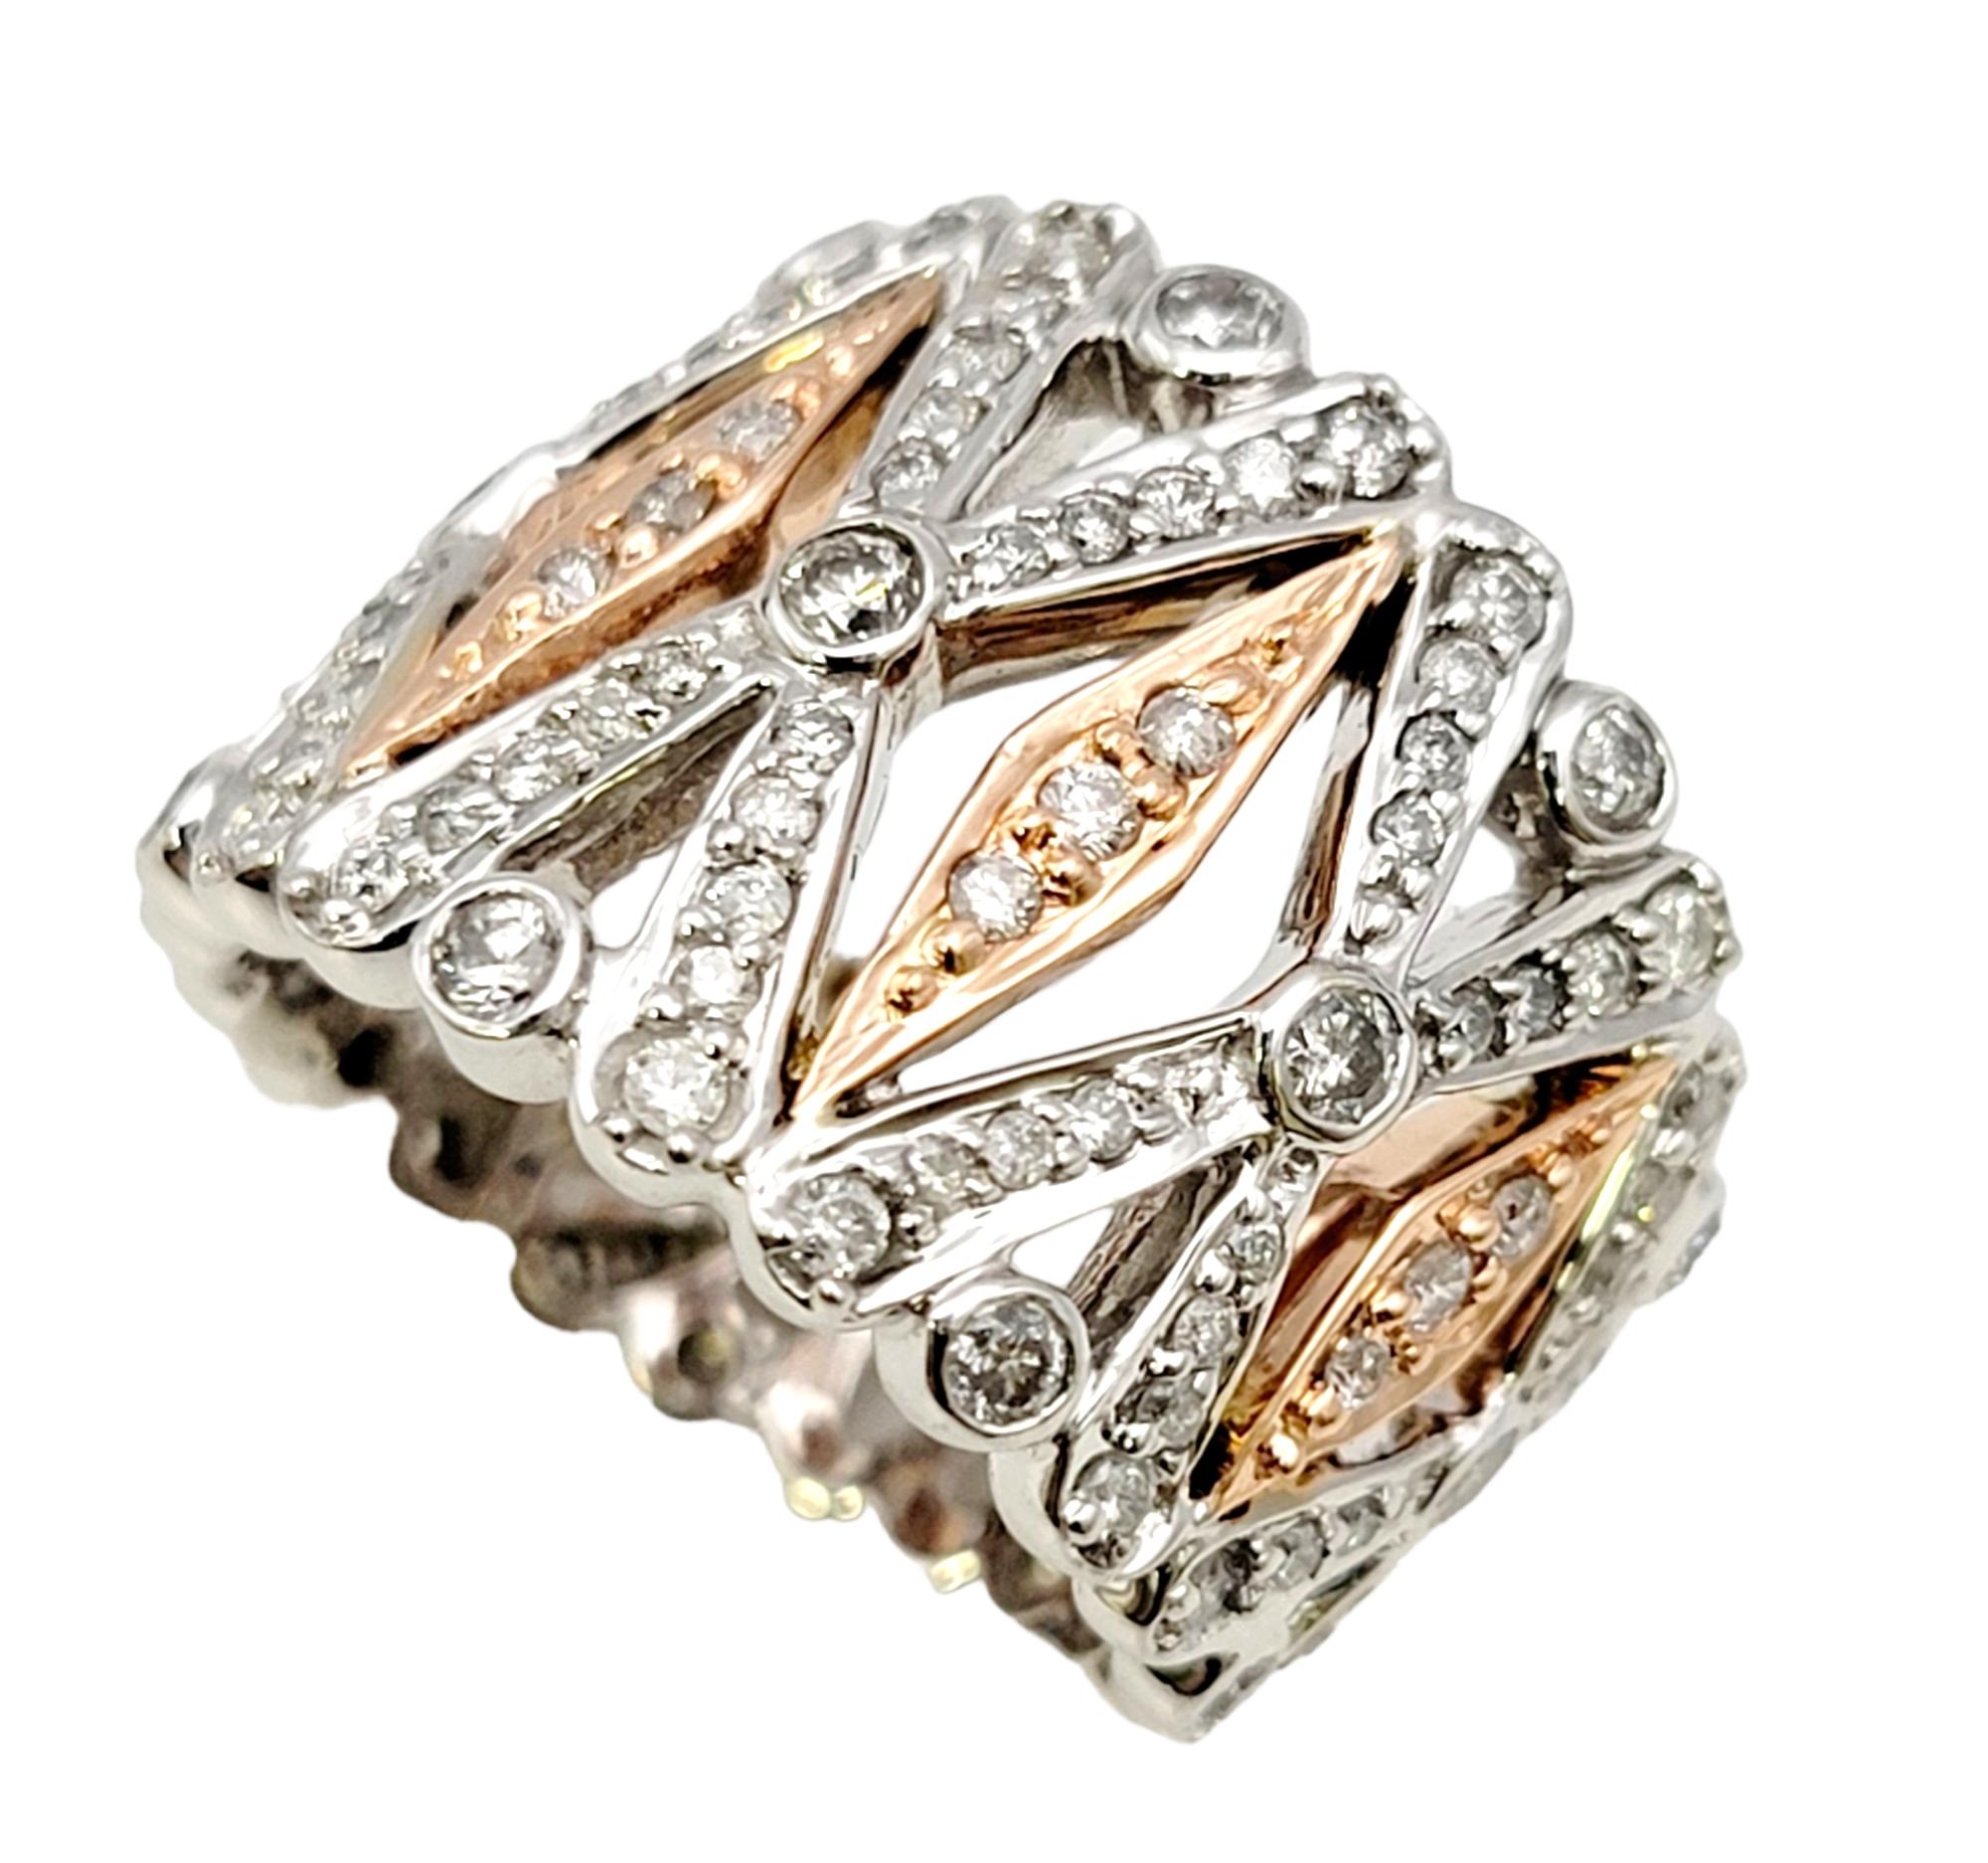 Ring size: 5

Wrap your finger in modern elegance with this stunning two-tone designer diamond band ring by EFFY. The graduated diamond embellished band features both rose and white golds with a vertical 'X' design throughout. In between the